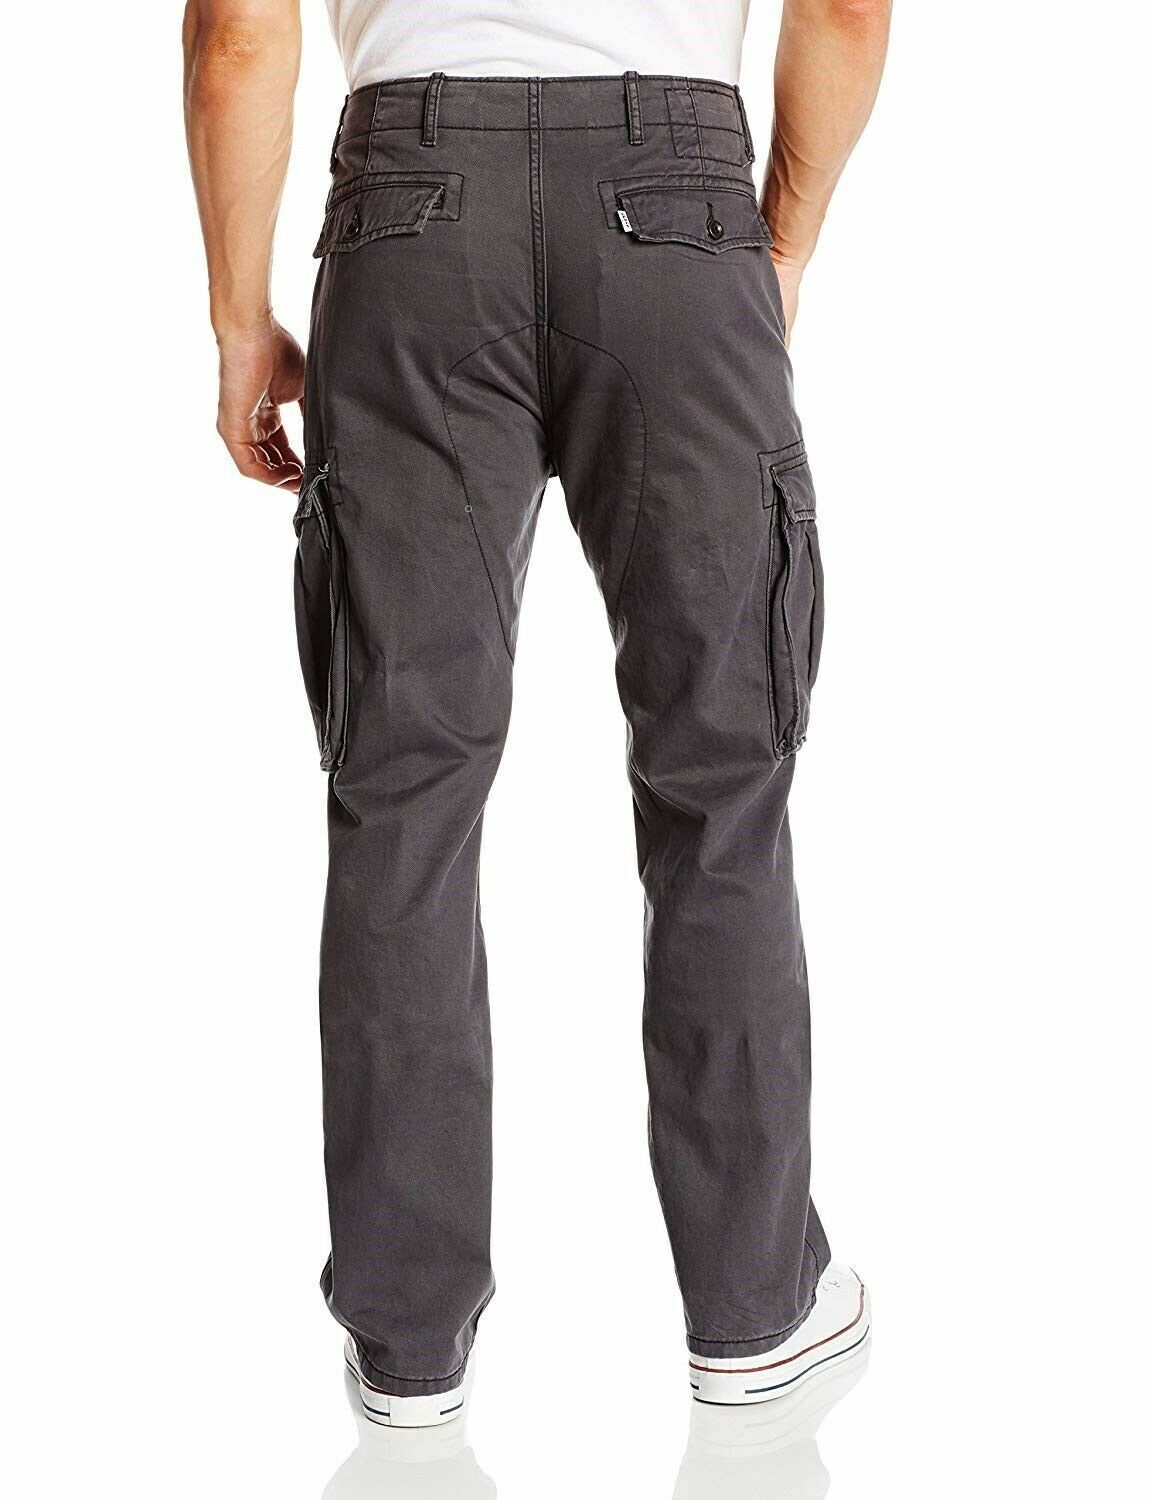 LEVIS RELAXED FIT ACE CARGO PANTS GRAPHITE DARK GRAY 124620049 - Pants